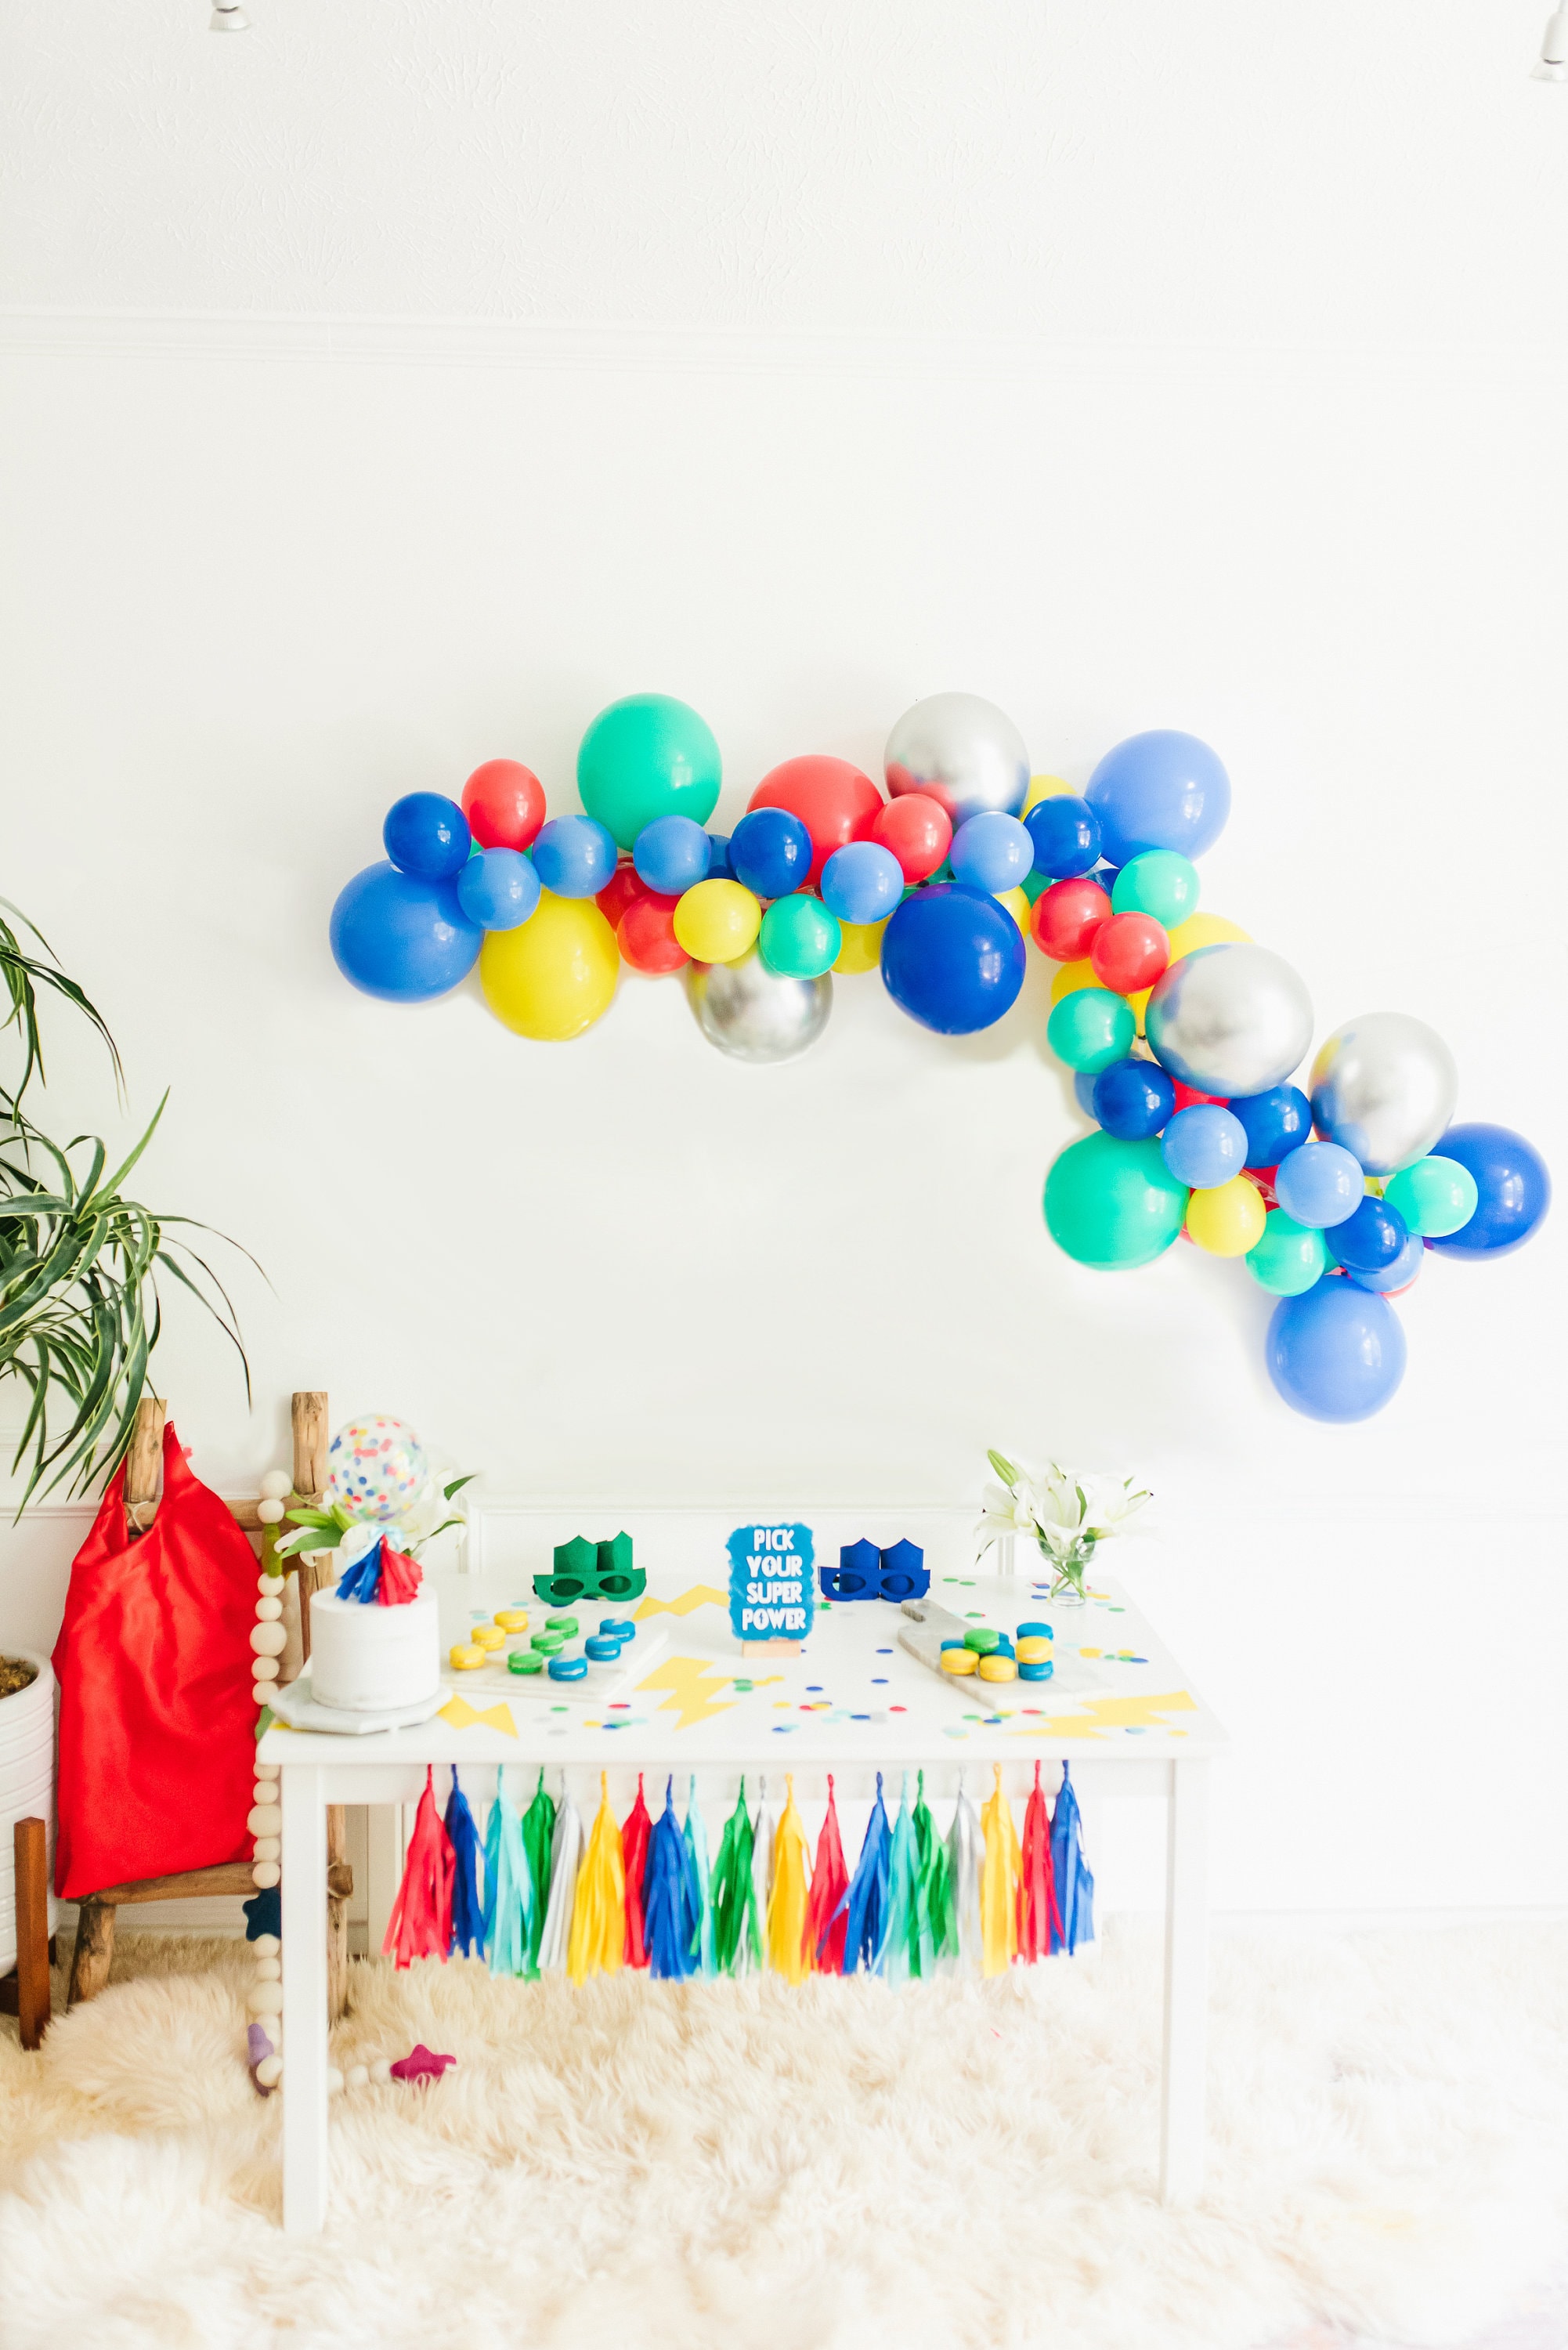 Super Cool Ideas for Birthday Party Decorations with Balloons